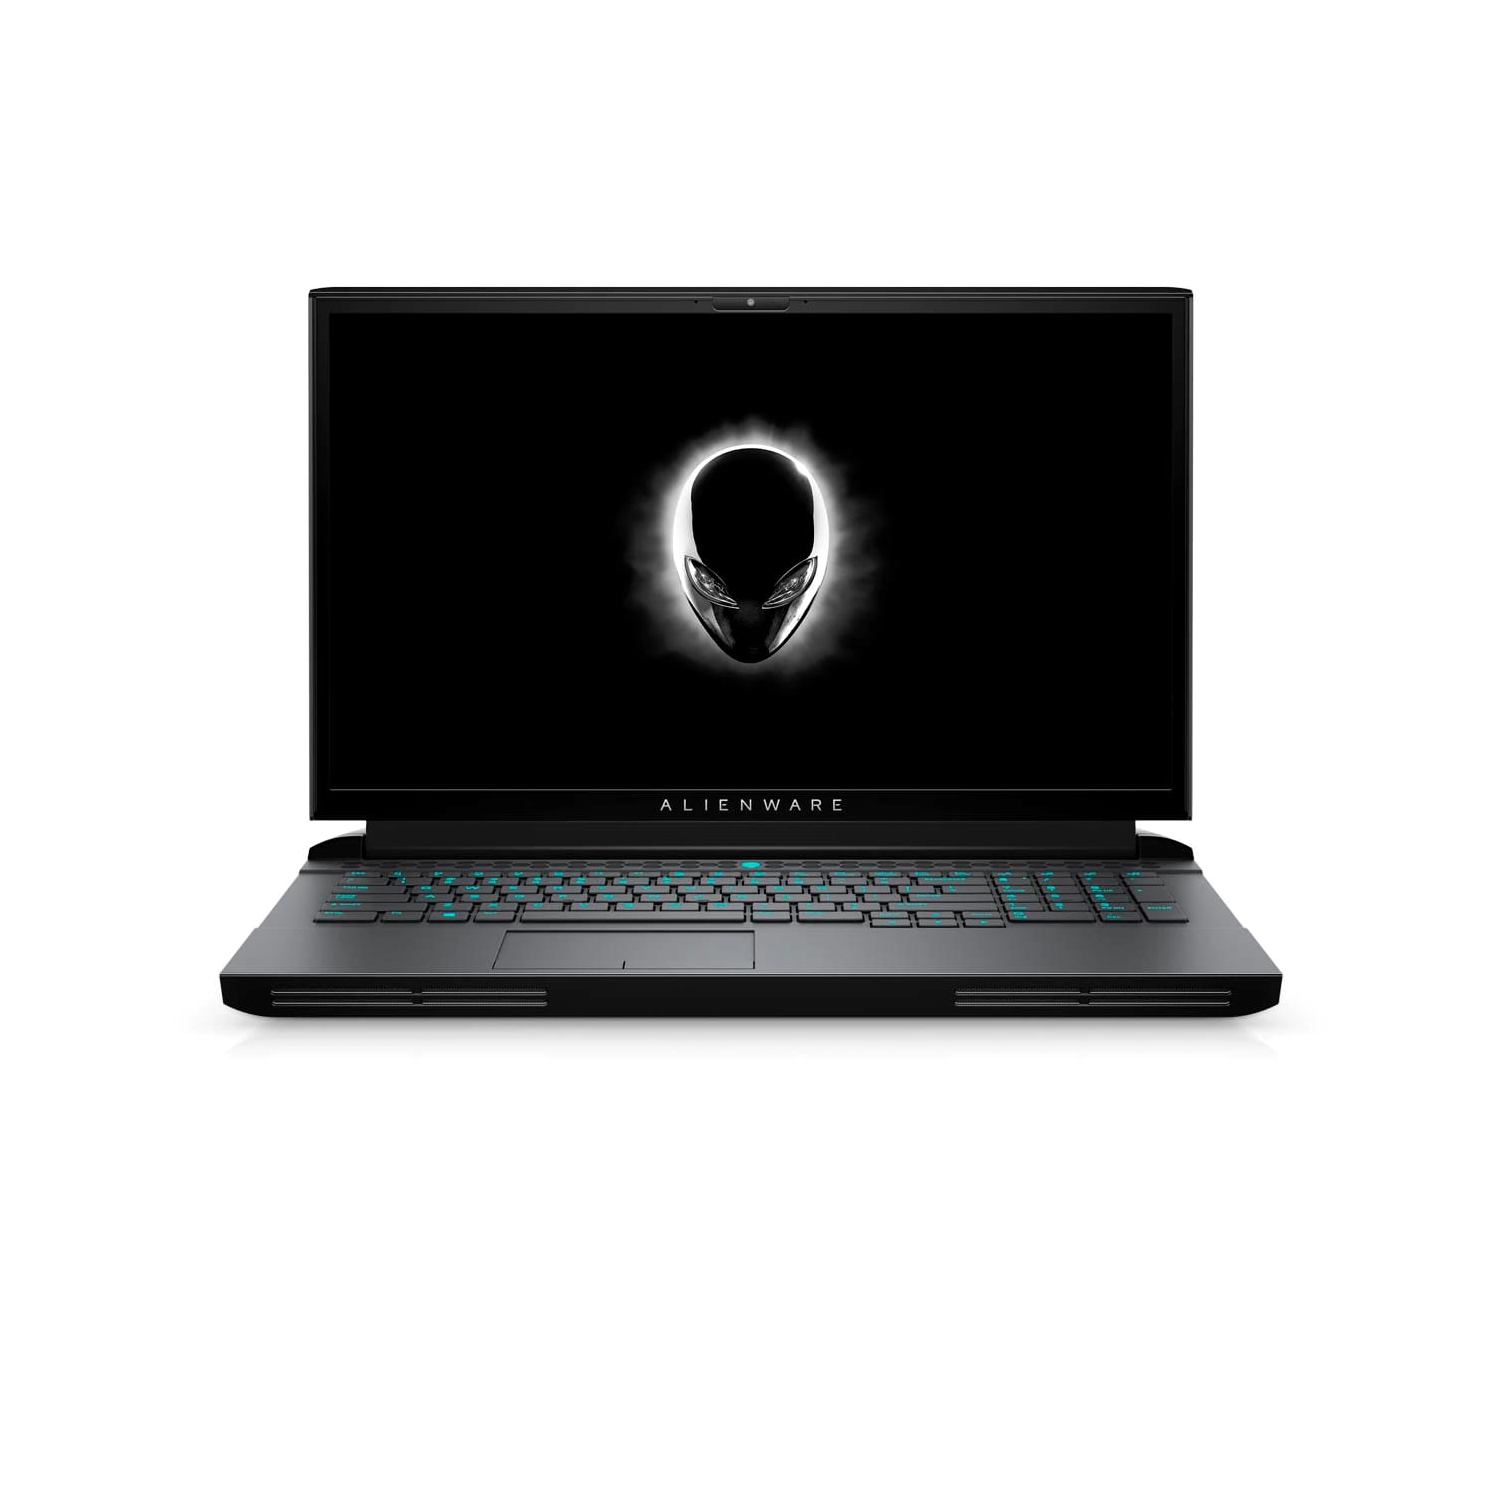 Refurbished (Excellent) - Dell Alienware 17 51m R2 Gaming Laptop (2020), 17.3" FHD, Core i7, 1TB HDD + 256GB SSD, 16GB RAM, 2070 Super, 4.8 GHz, 10th Gen CPU Certified